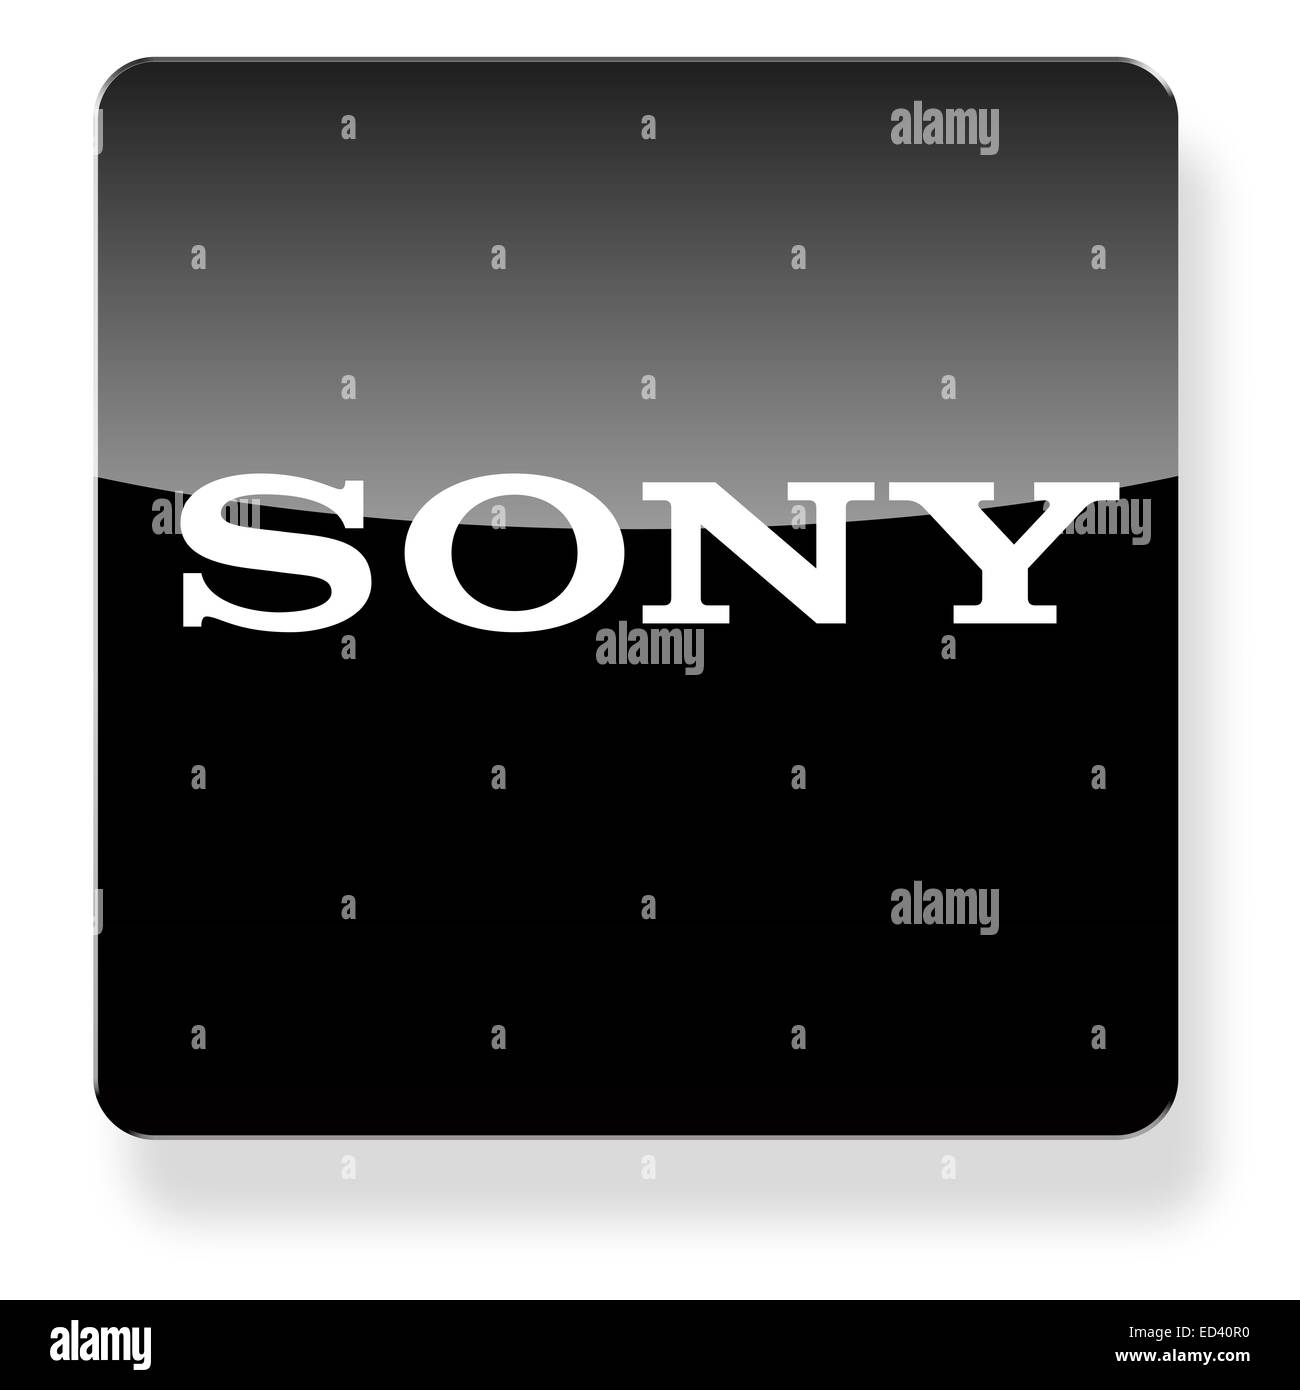 Sony logo as an app icon. Clipping path included. Stock Photo